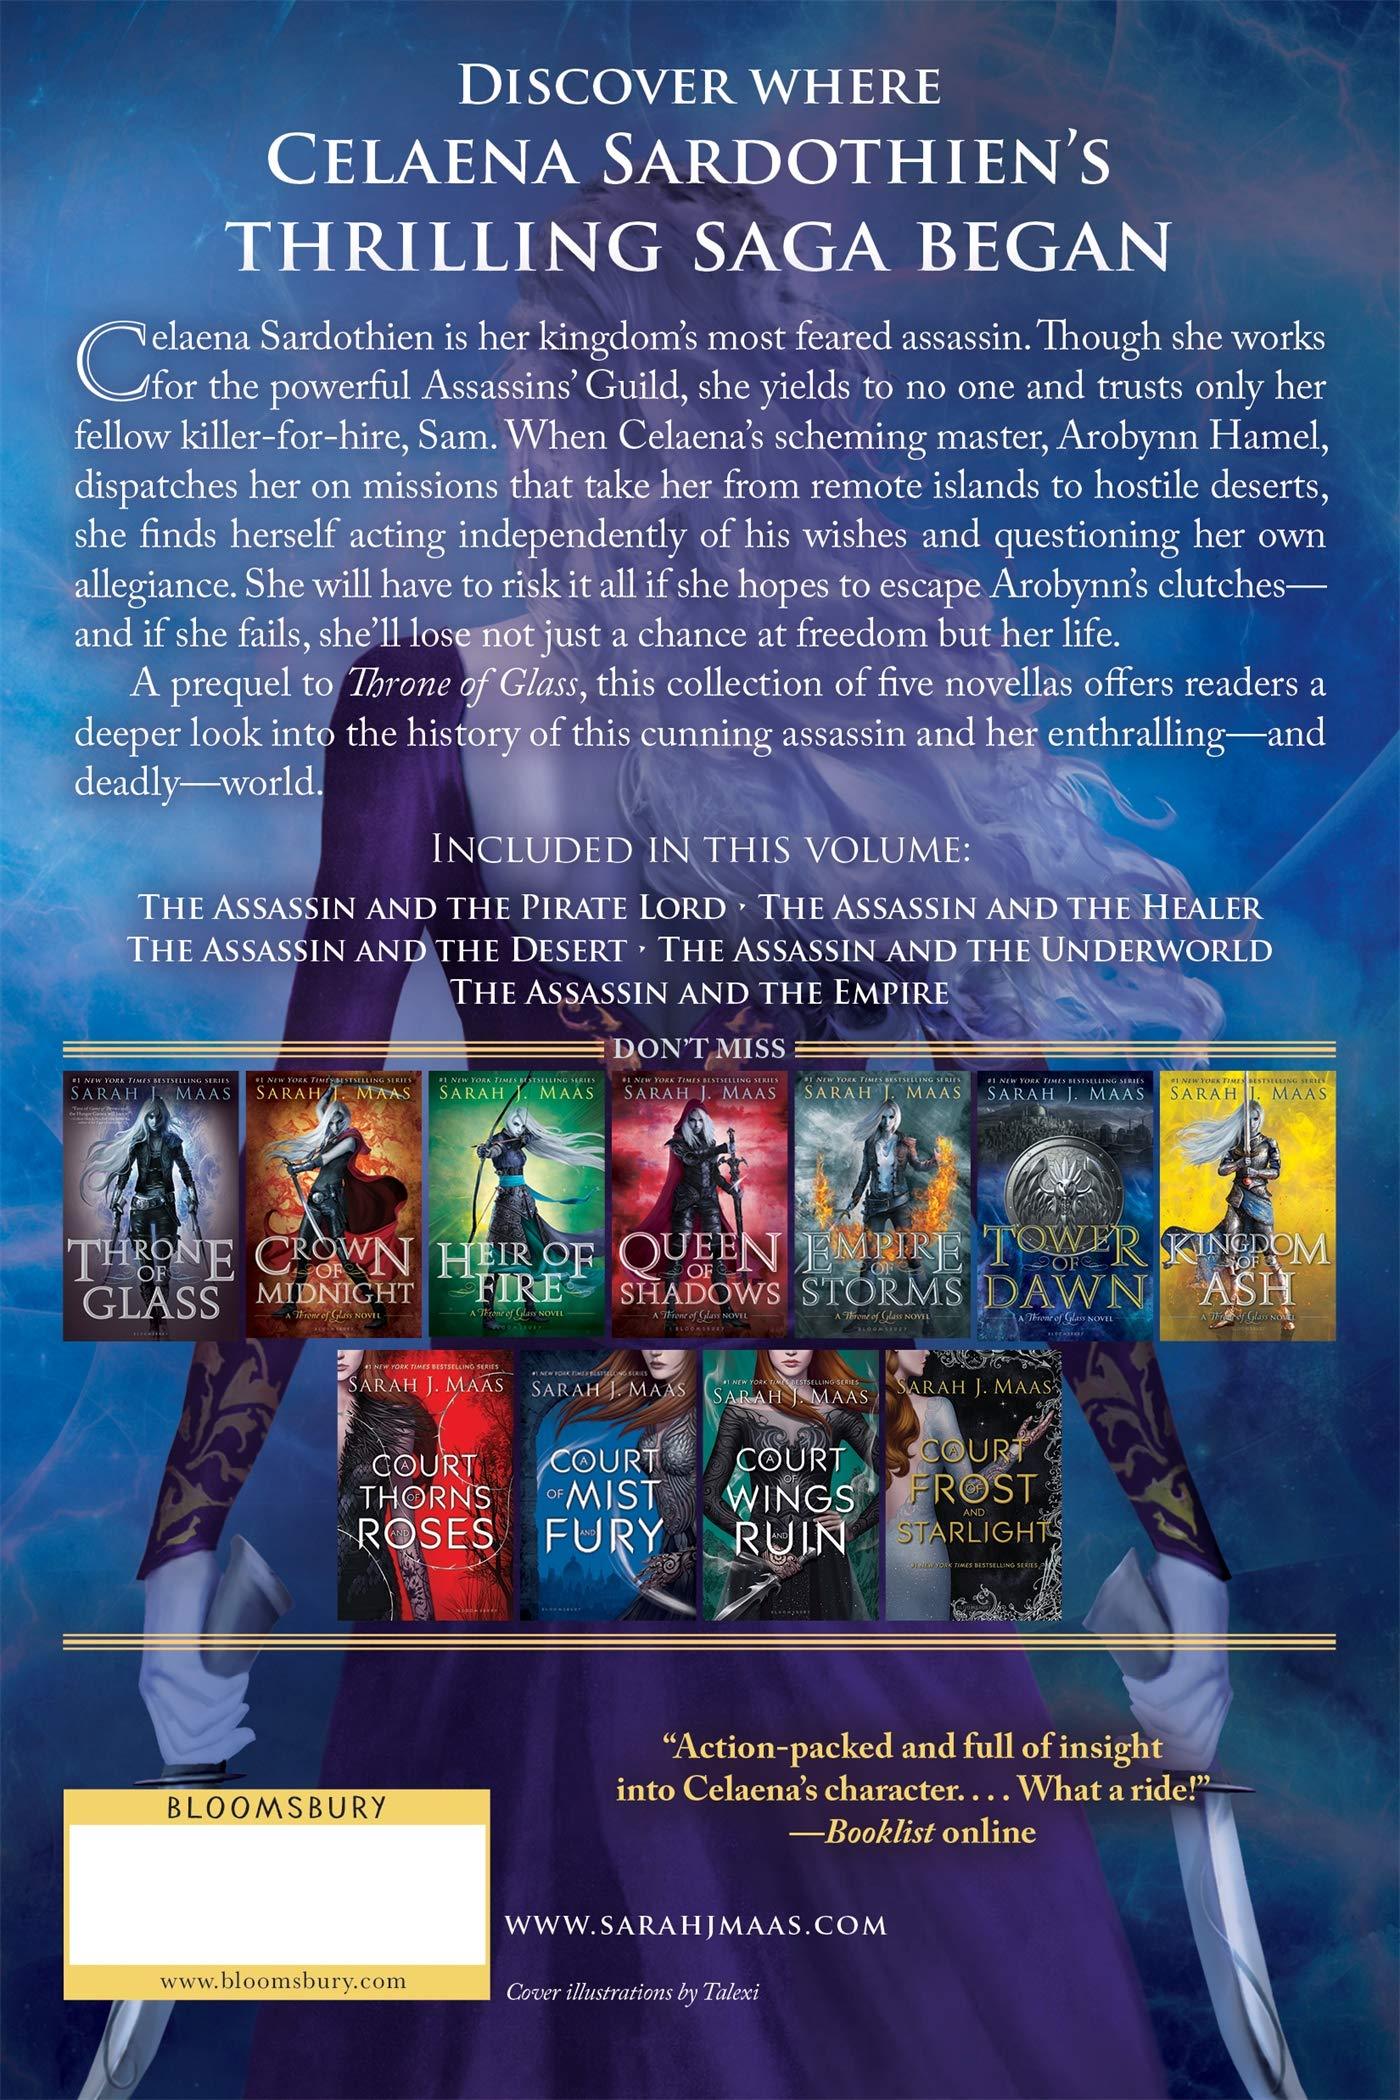 The Assassin's Blade (The Throne of Glass) by Sarah J. Maas